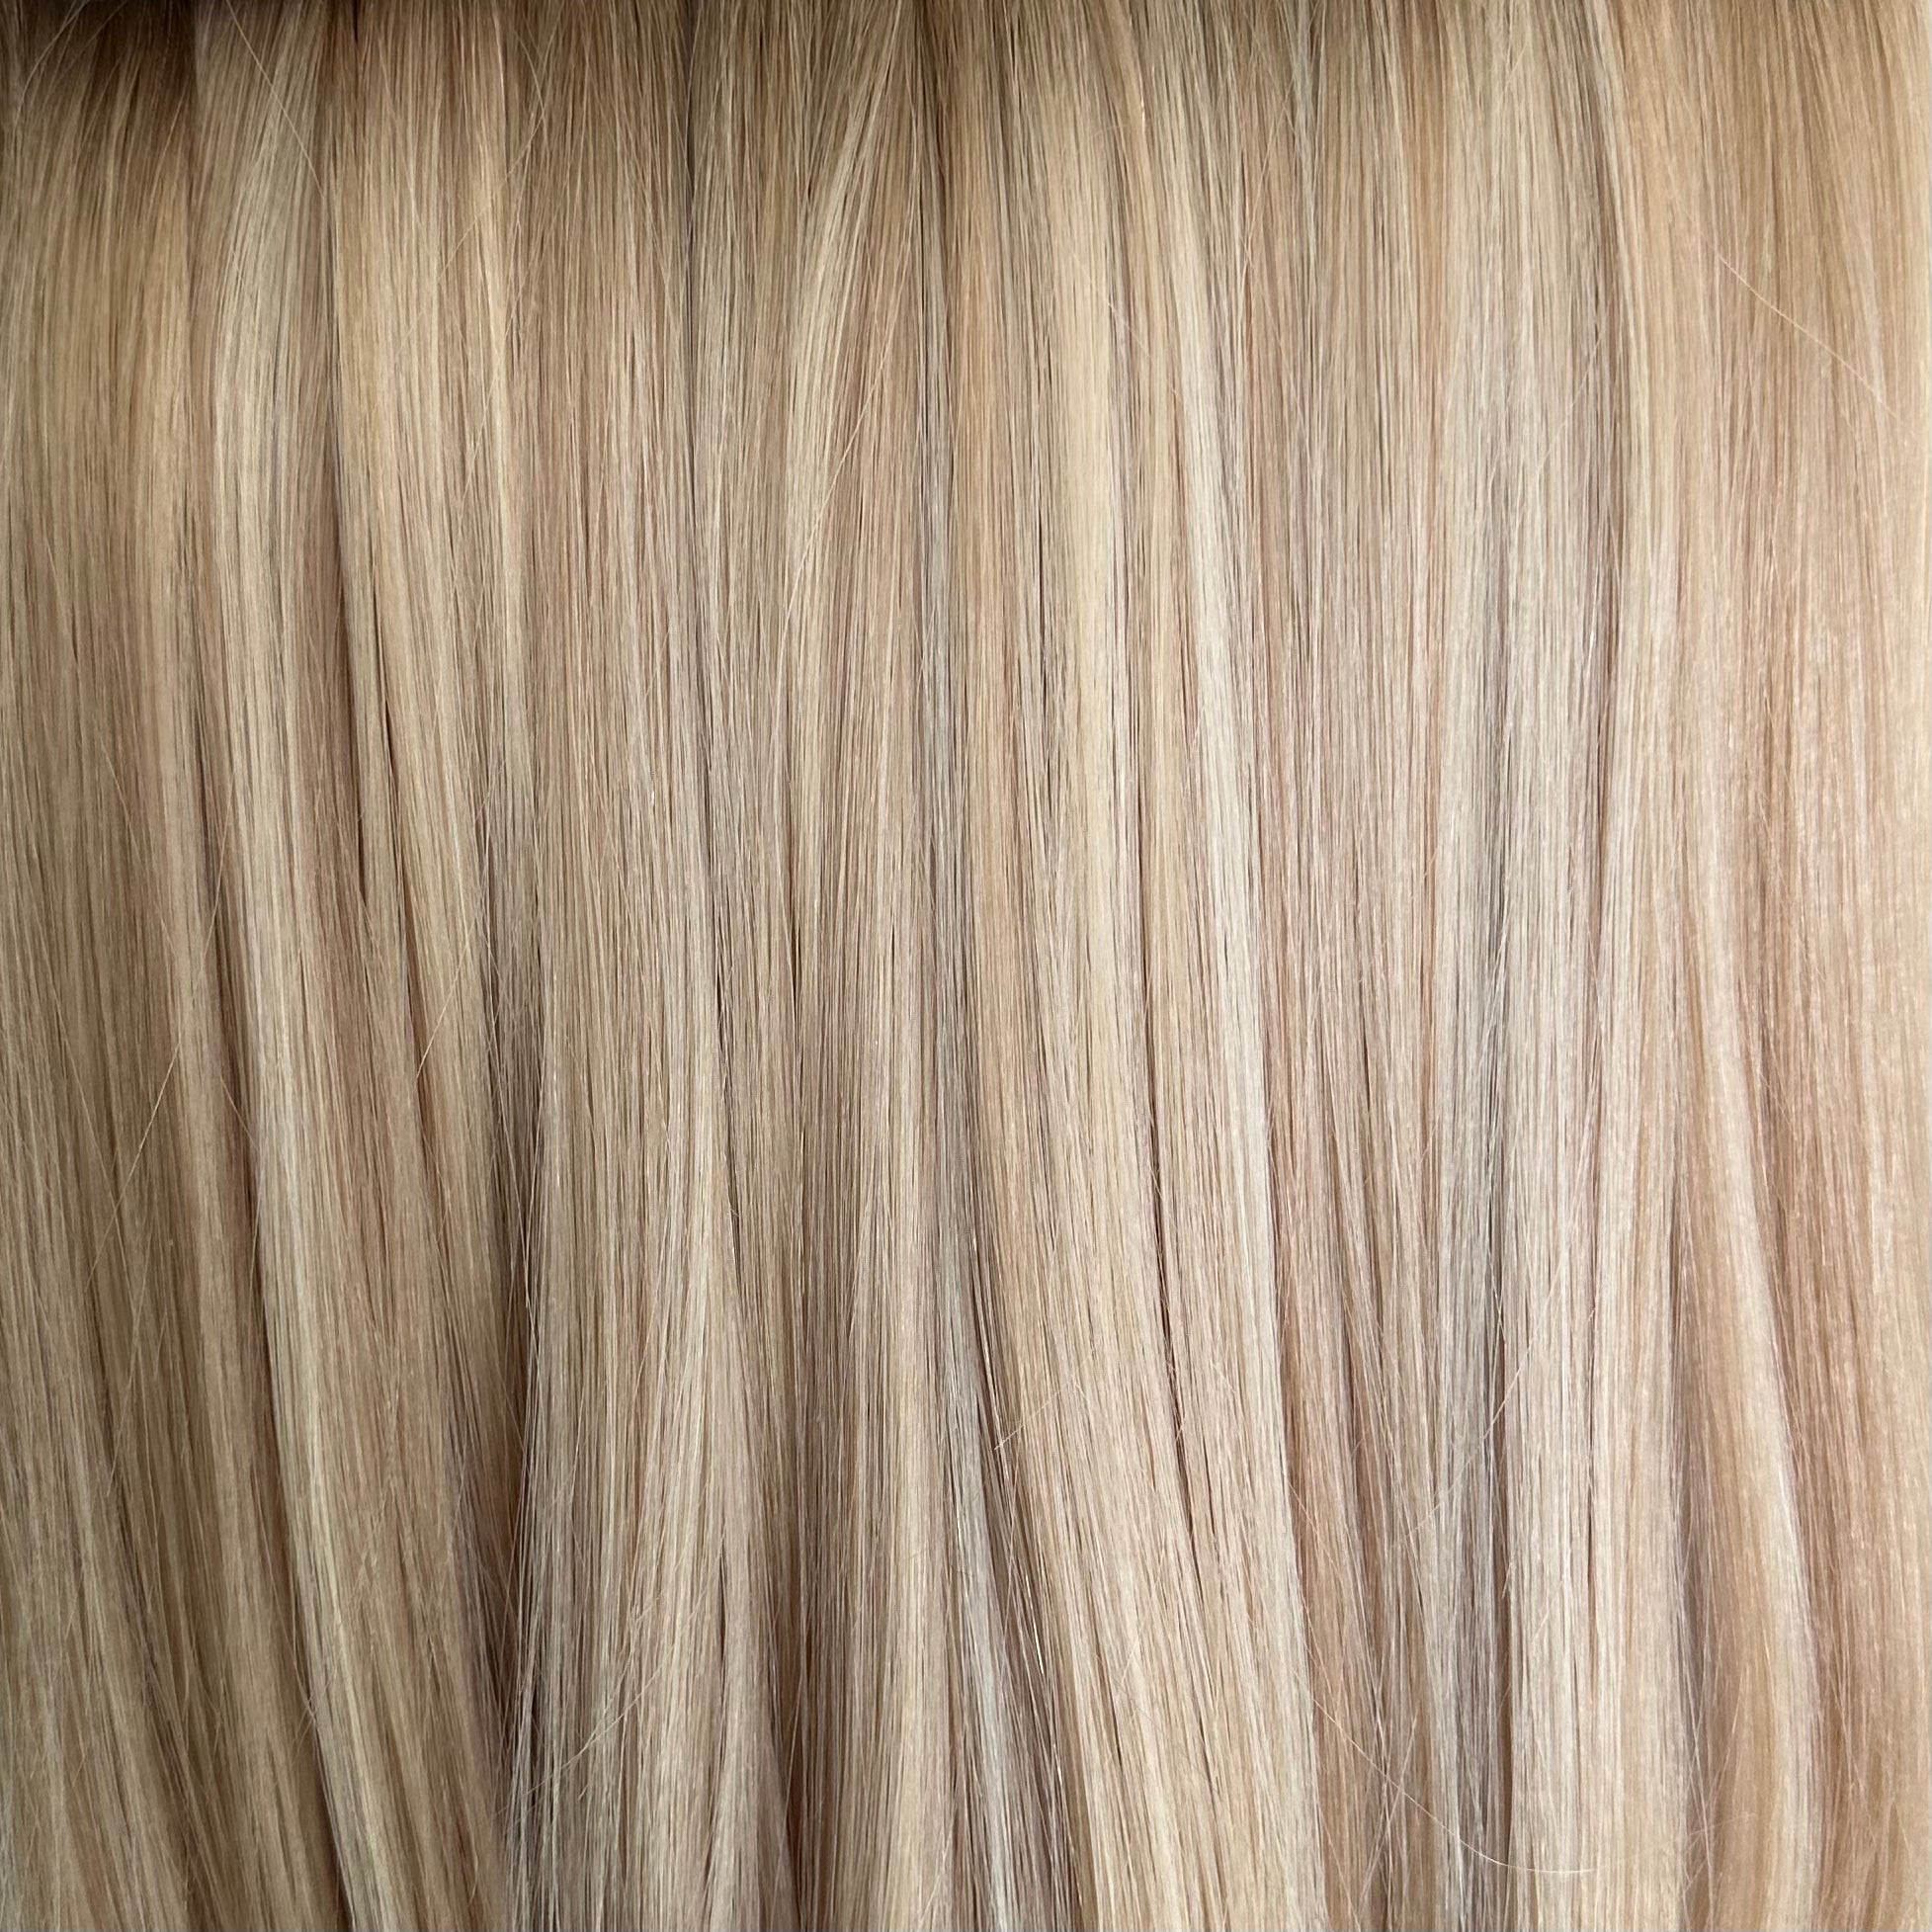 Rooted Sunkissed Blonde - Luxe Hand Tied Wefts